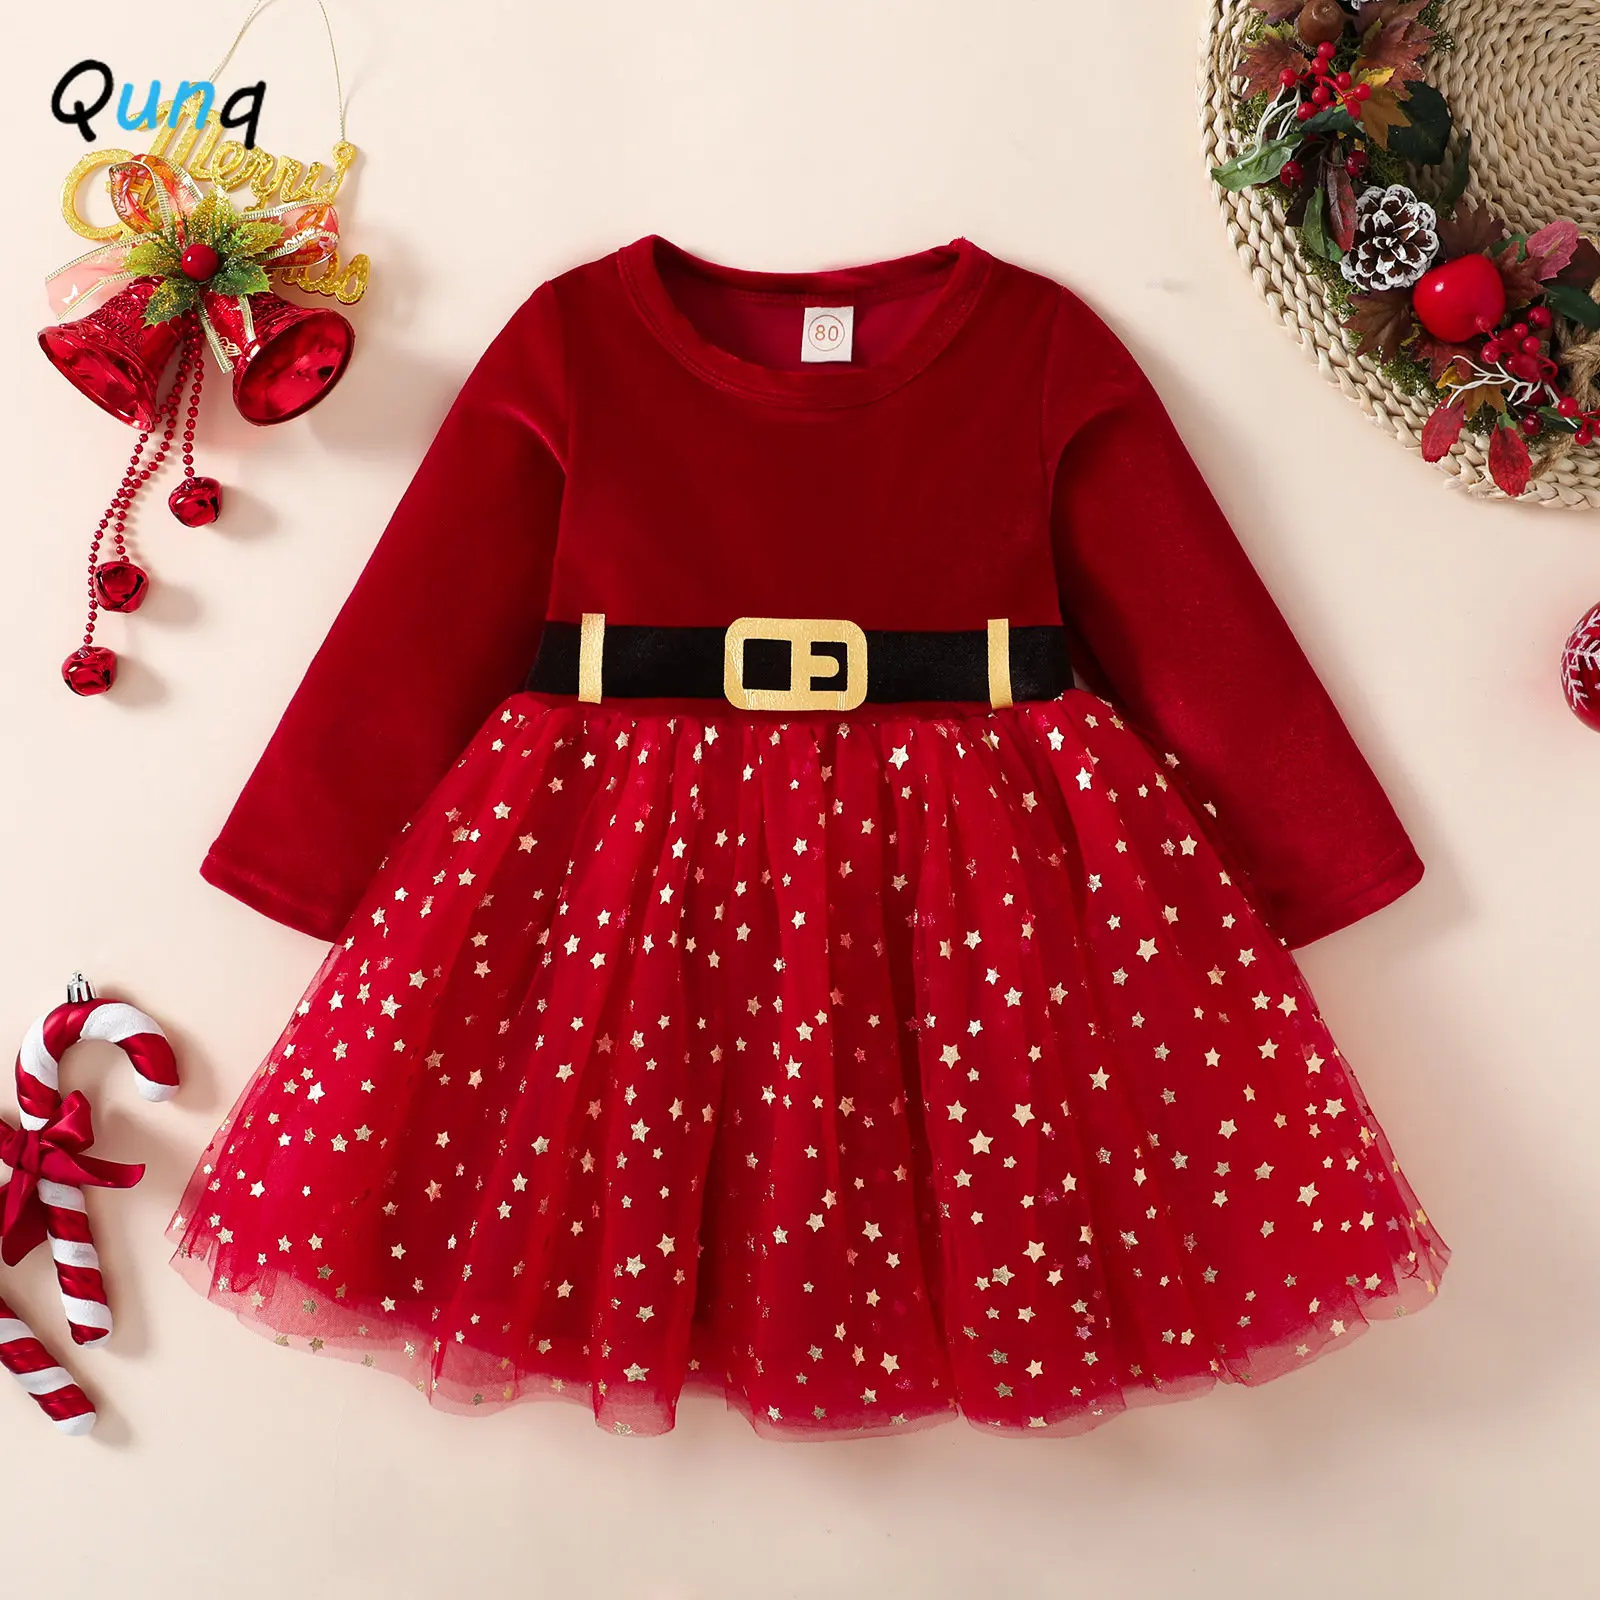 

Qunq Autumn Christmas Clothes Girls Velvet O Neck Long Sleeve Mesh Splicing Knee-Length Dress Casual Kids Clouthes Age 3T-8T